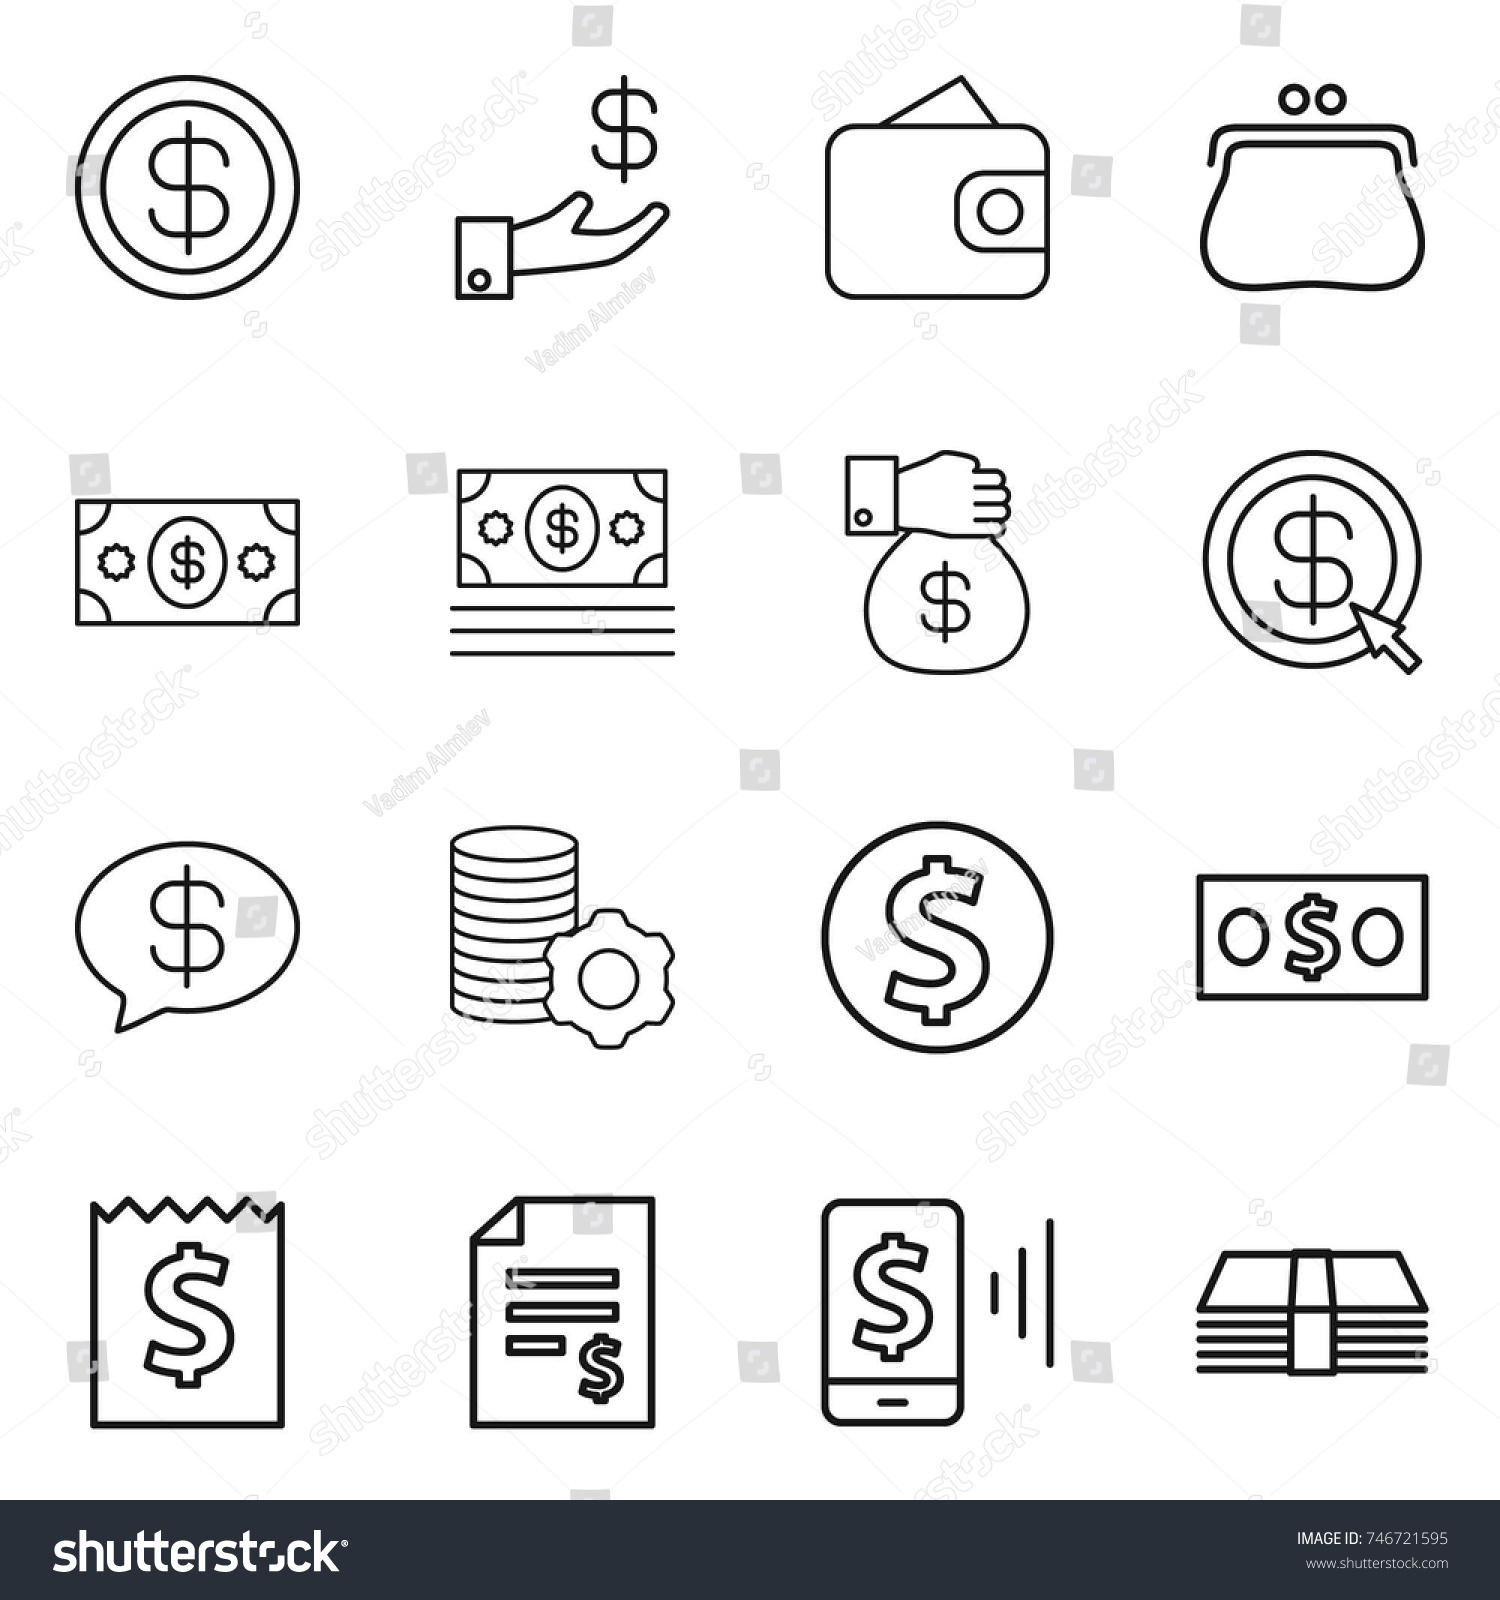 thin line icon set : dollar, investment, wallet, purse, money, gift, arrow, message, virtual mining, coin, receipt, account balance, mobile pay #746721595